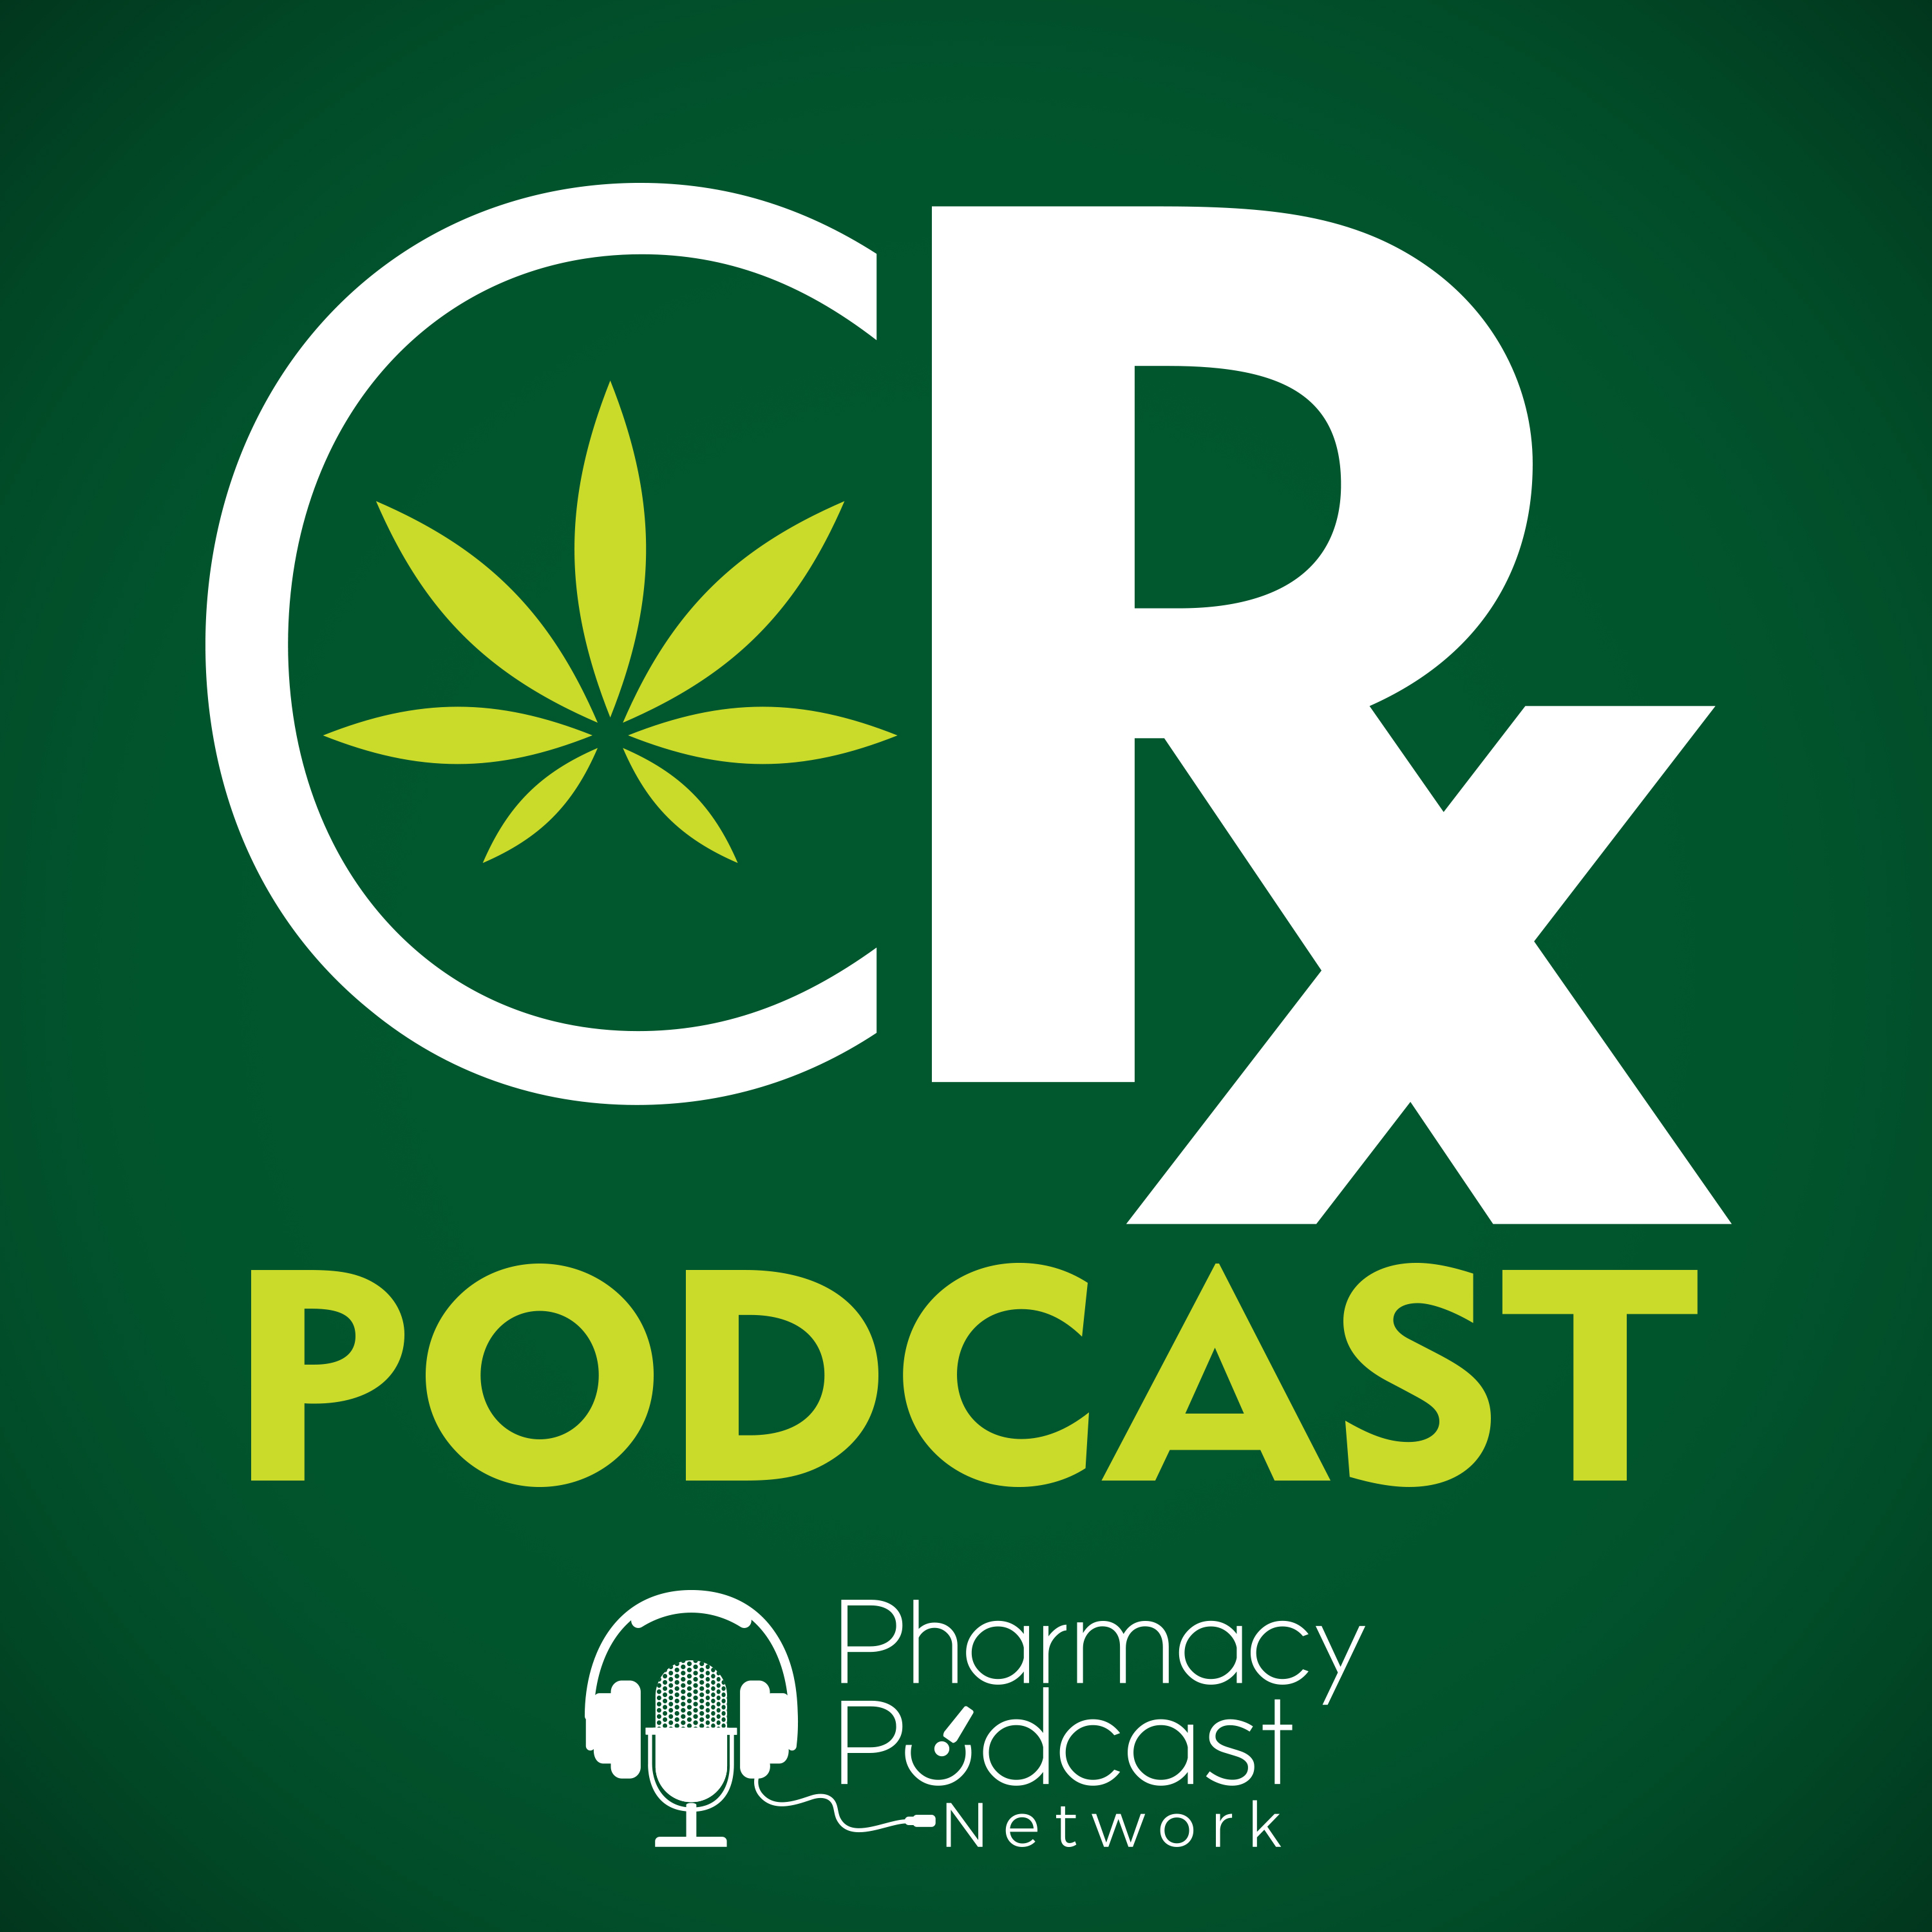 The Launch of the CRx Podcast | January 2021